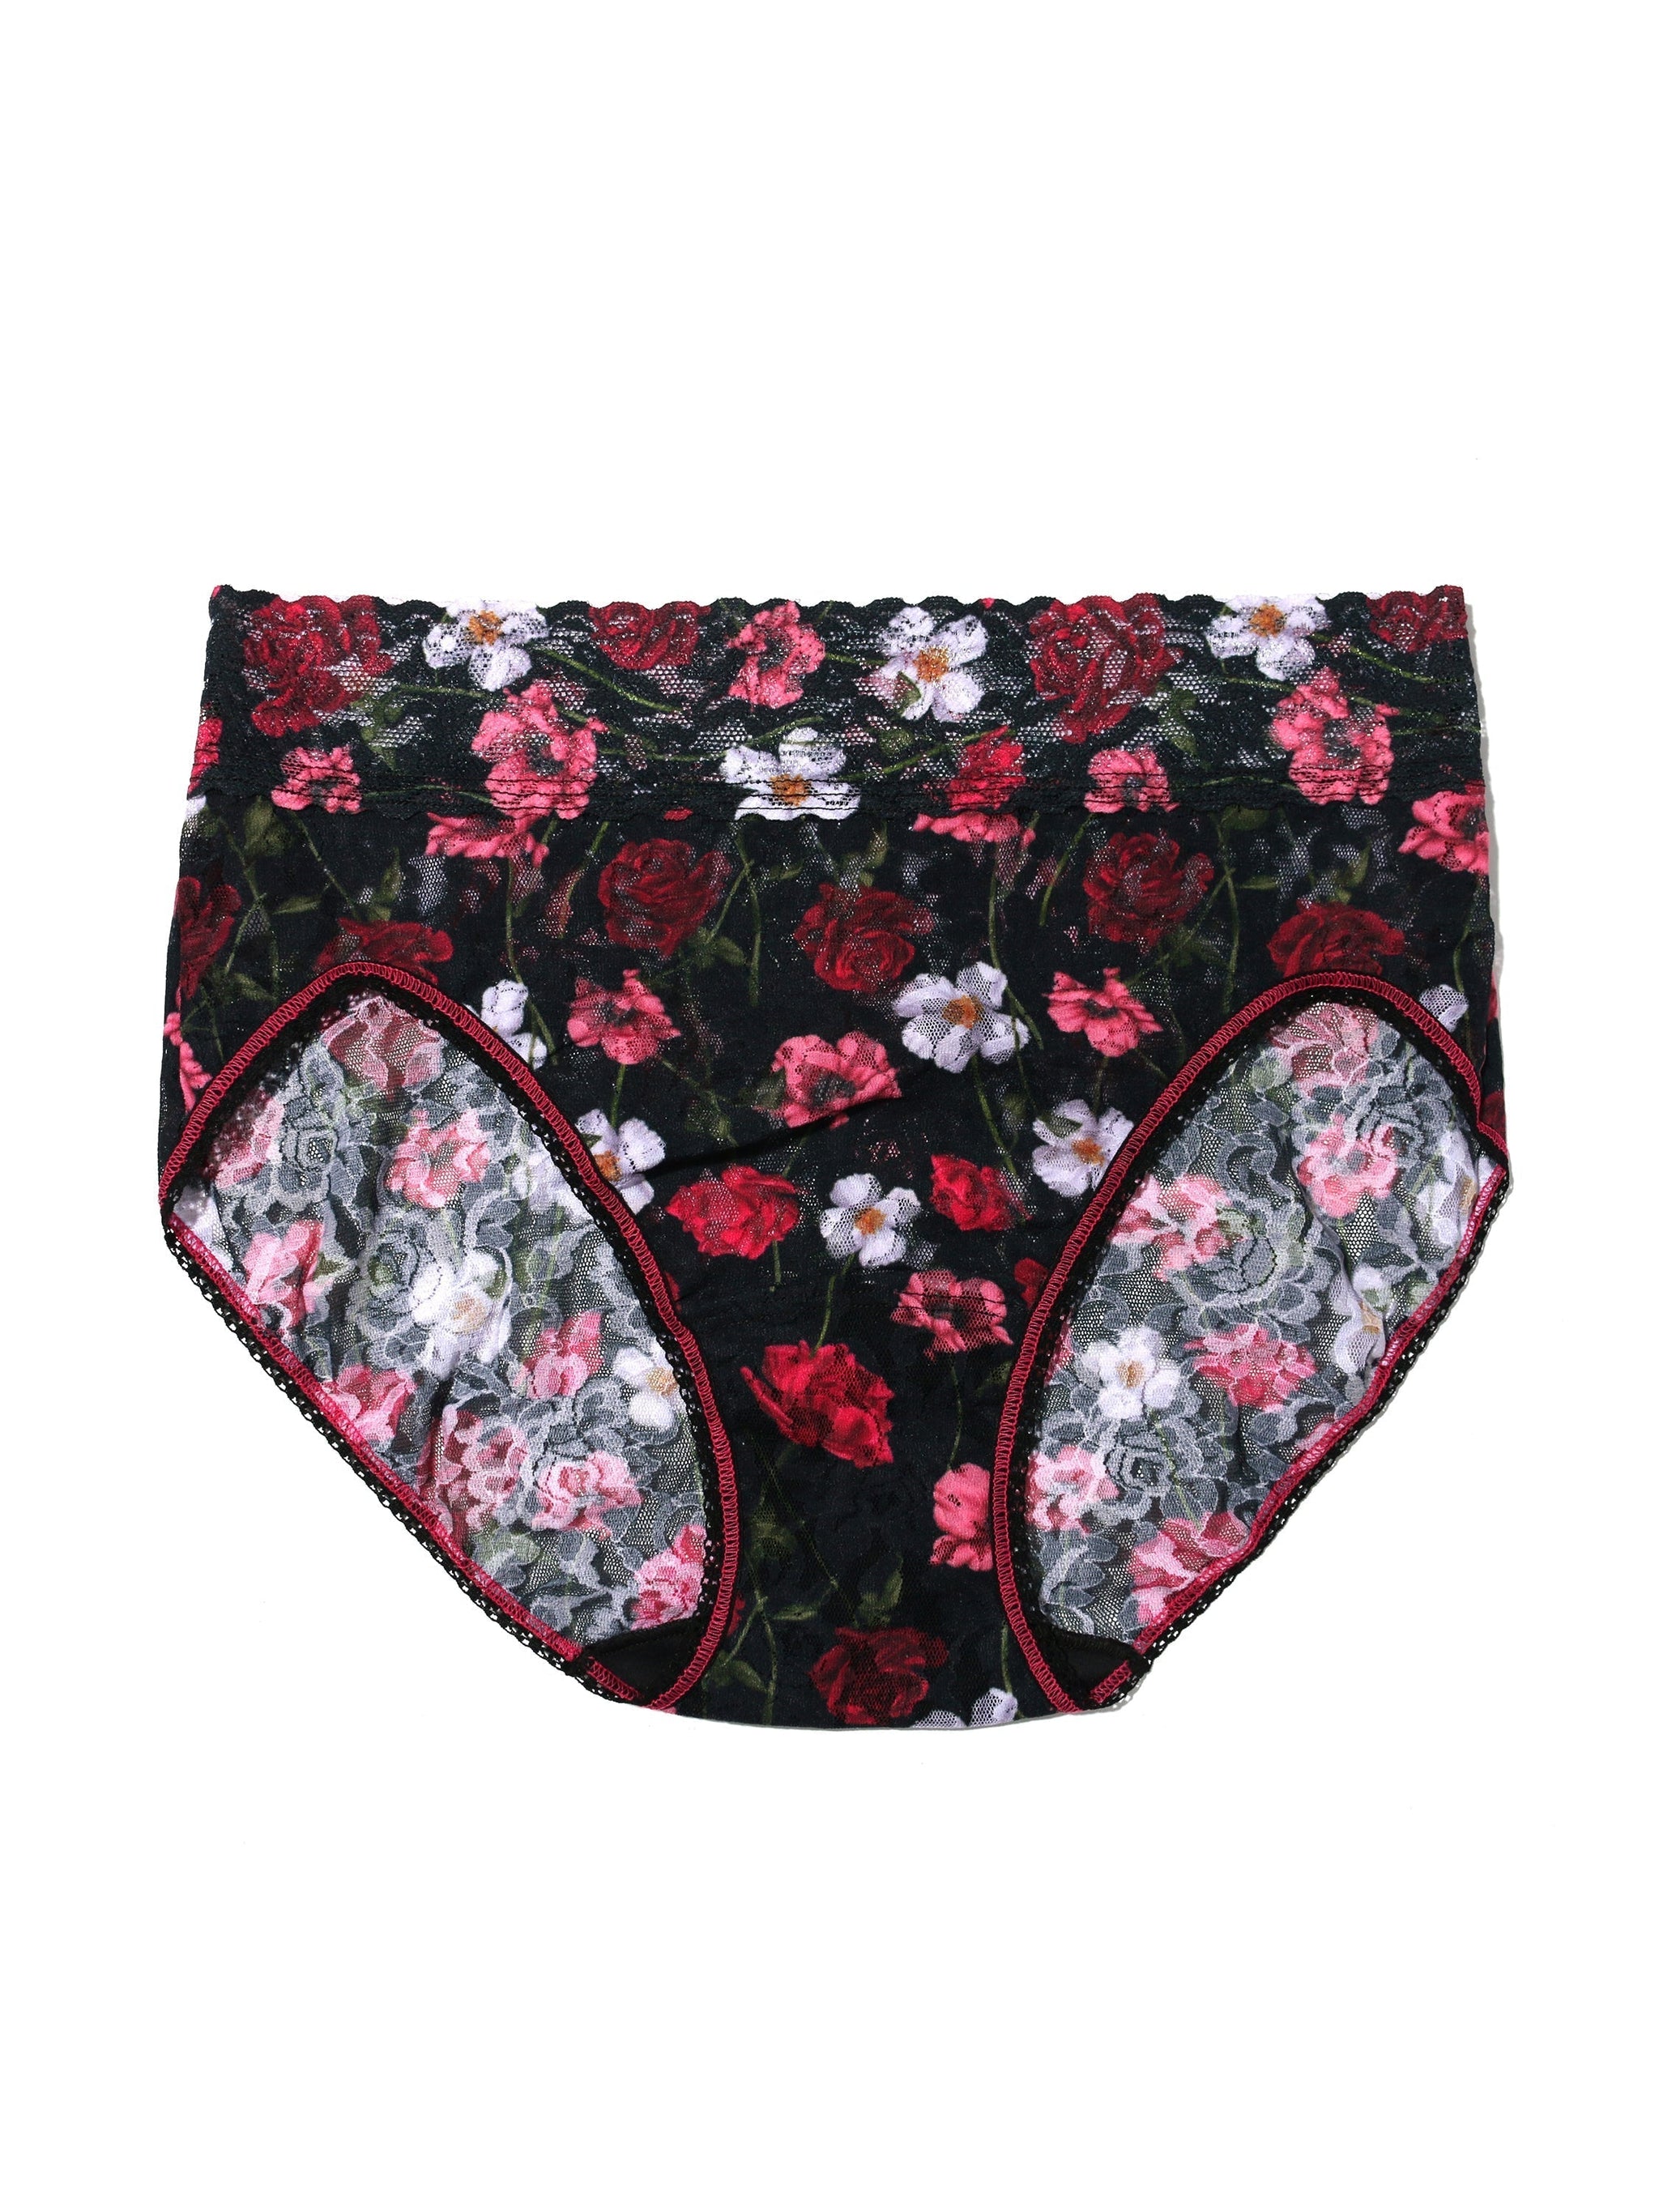 Printed Signature Lace French Brief Am I Dreaming Sale